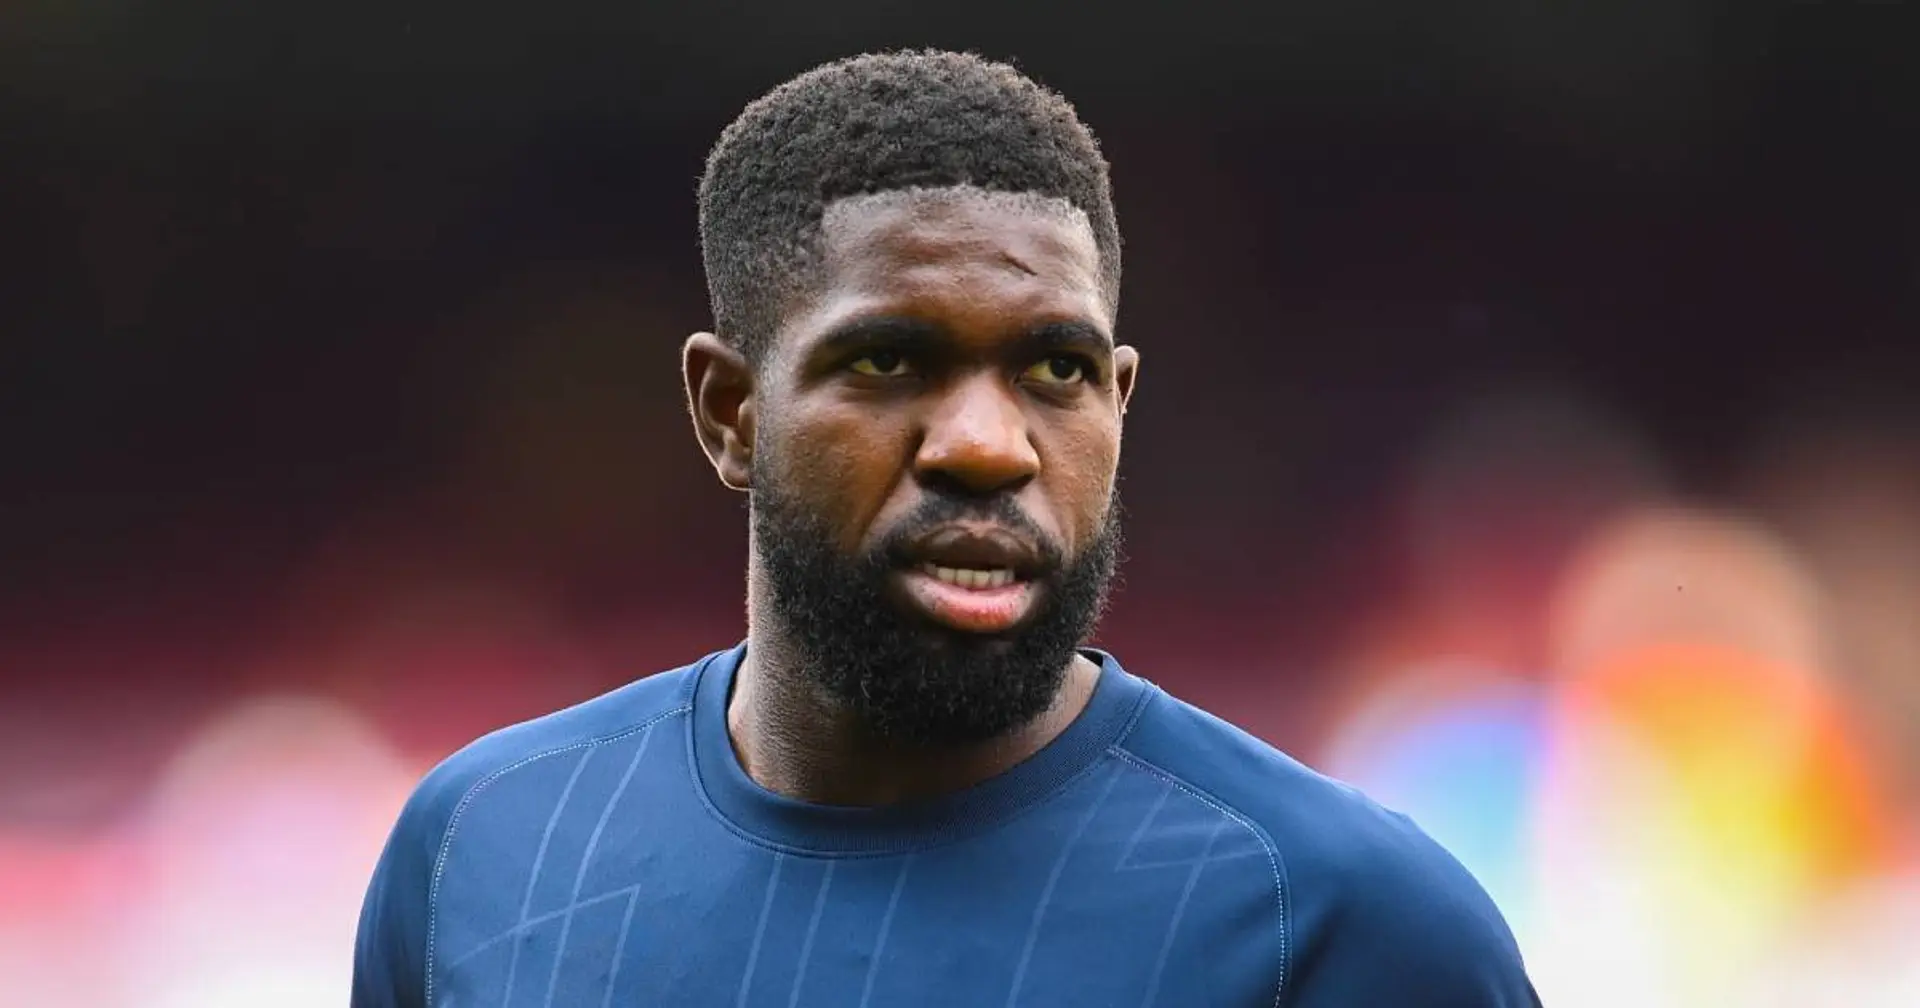 New club shows interest in Umtiti, set to arrive in Barcelona for negotiations